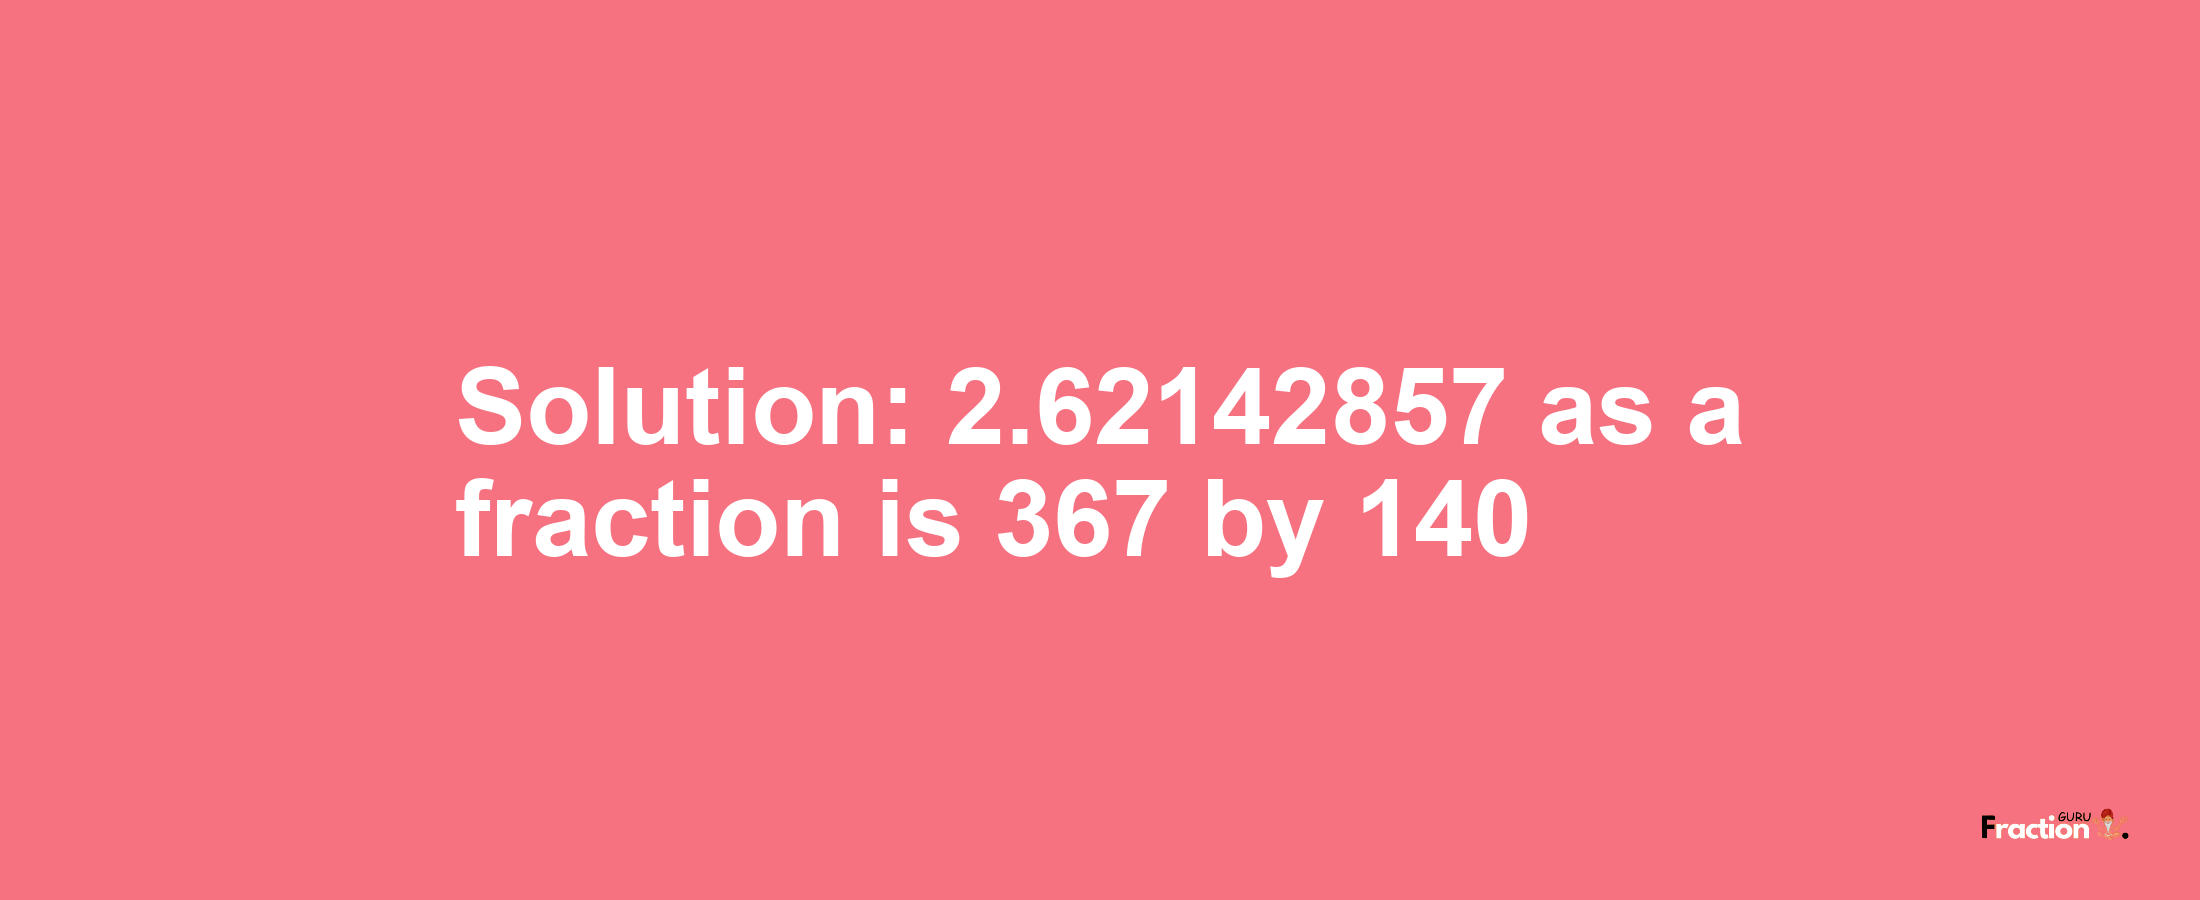 Solution:2.62142857 as a fraction is 367/140